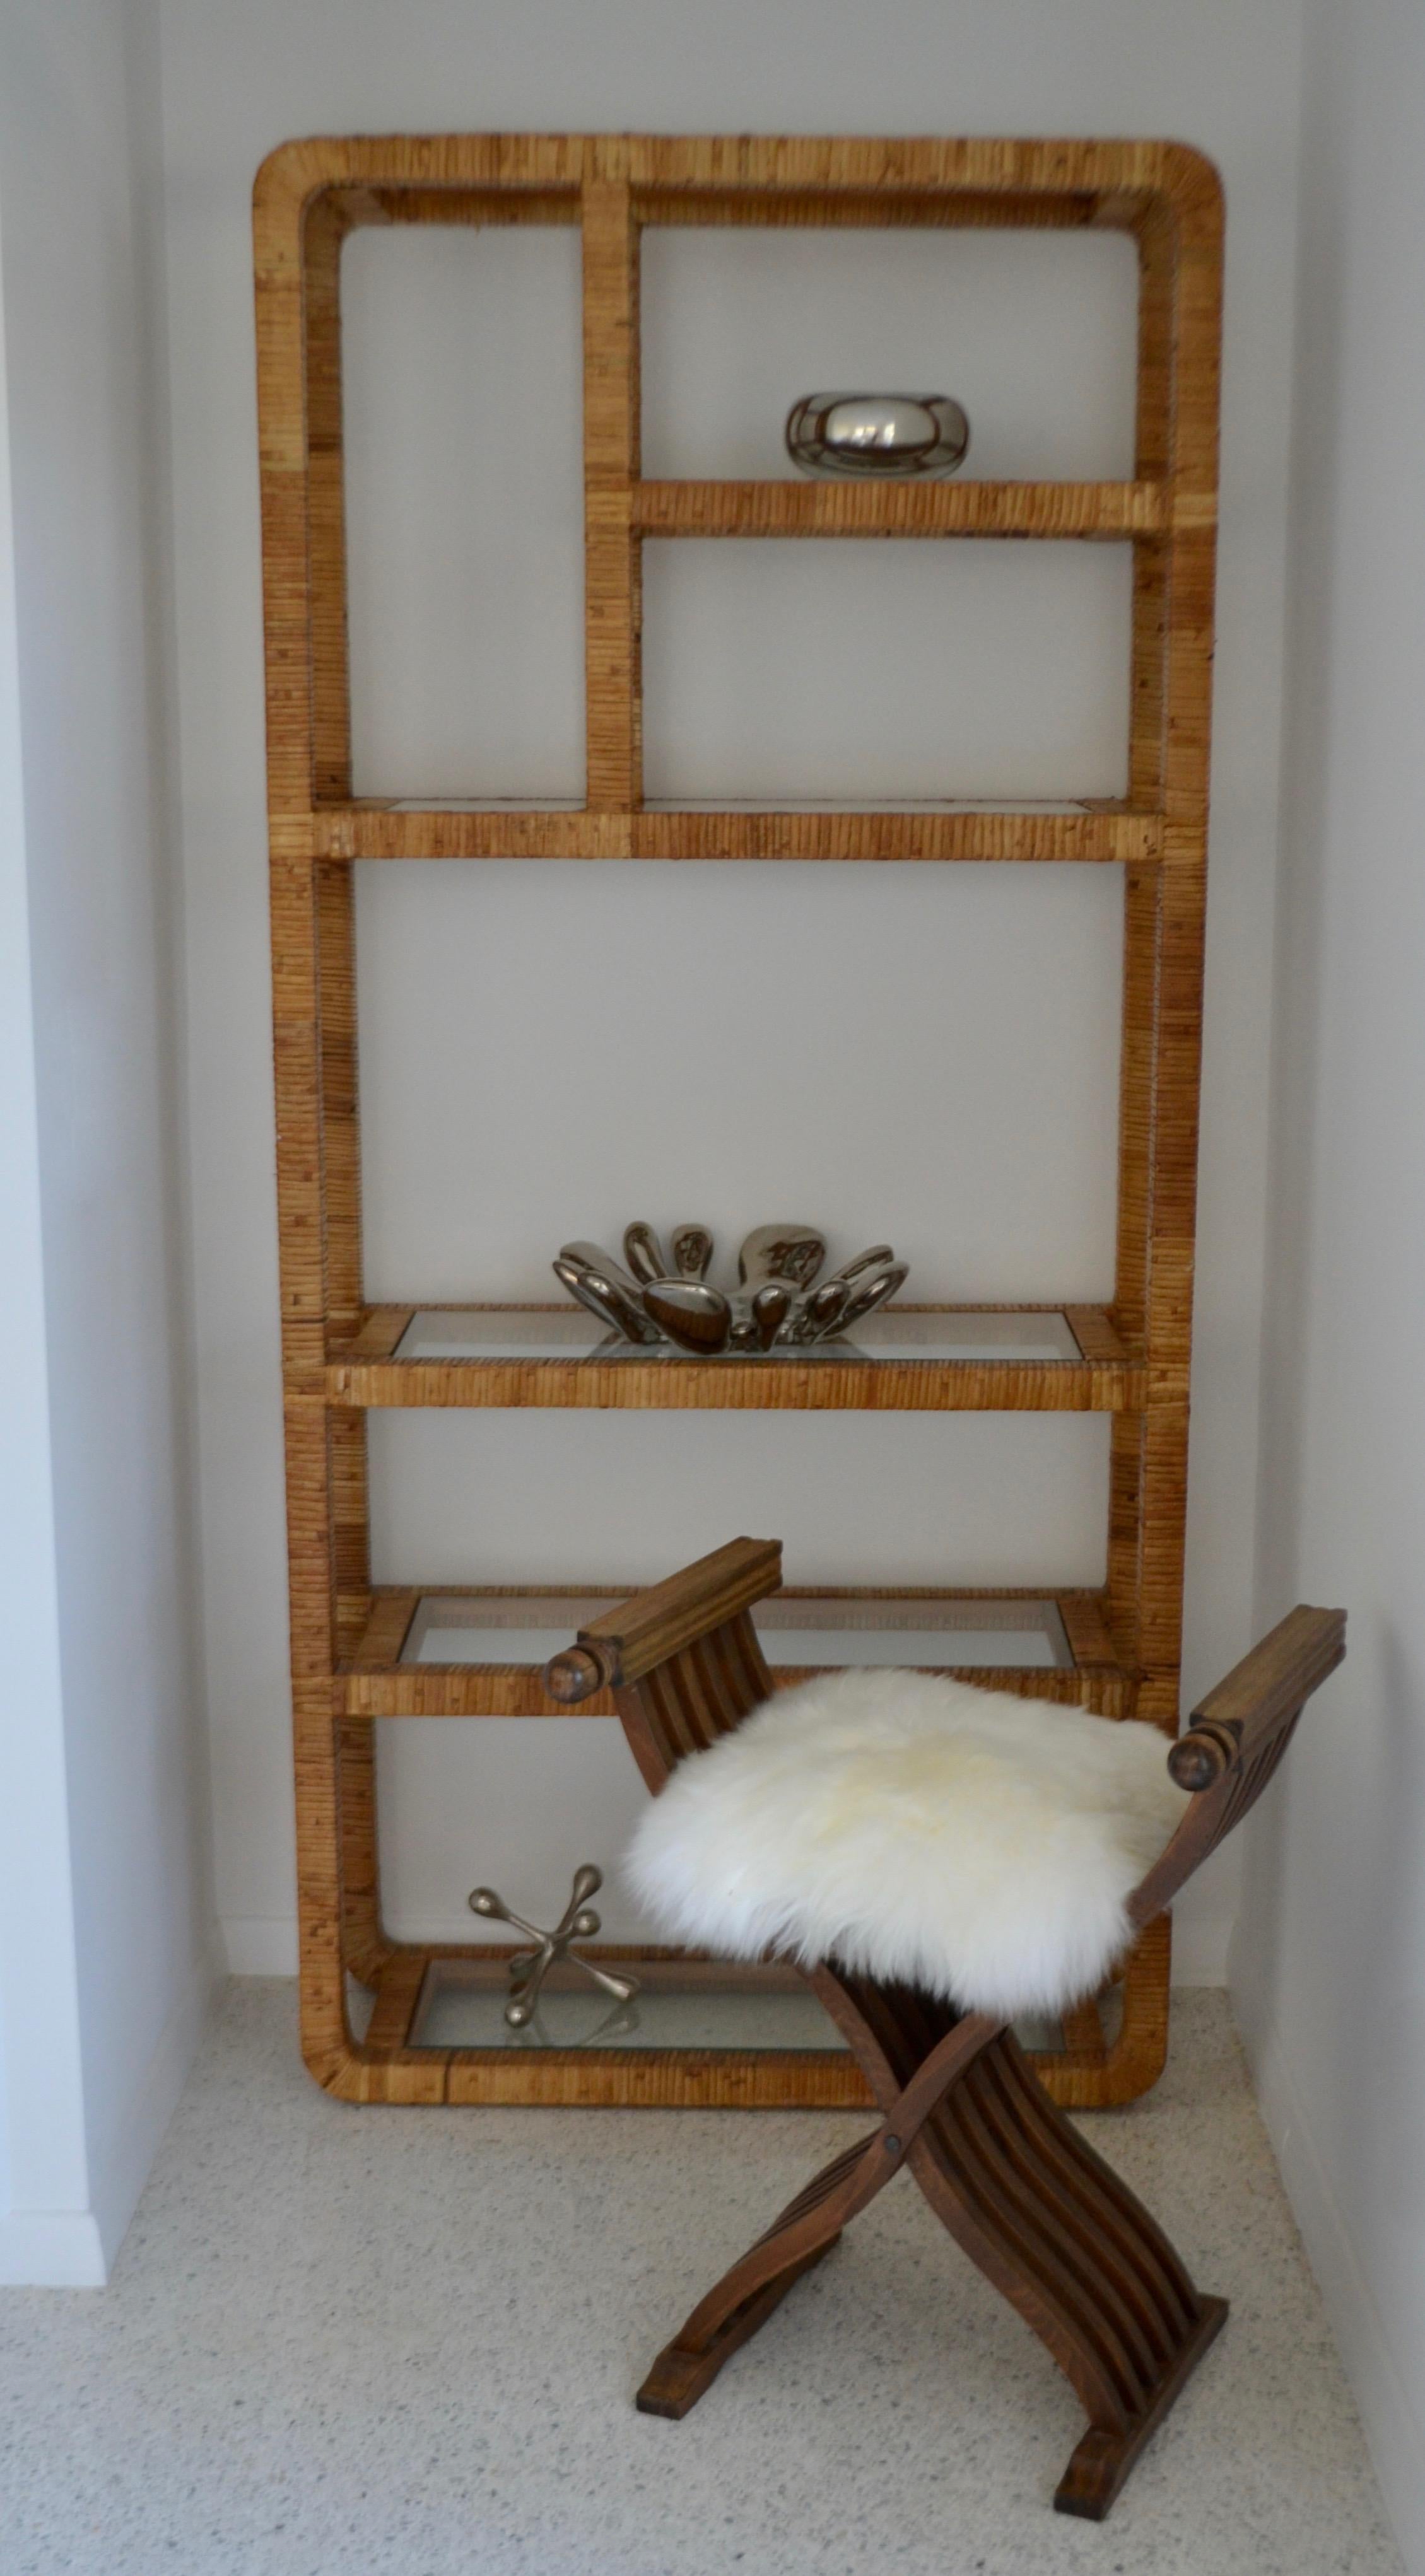 Striking midcentury rattan étagère, circa 1960s-1970s. This sculpturally designed rattan wrapped hardwood bookcase or bookshelf is accented with inset glass shelves.